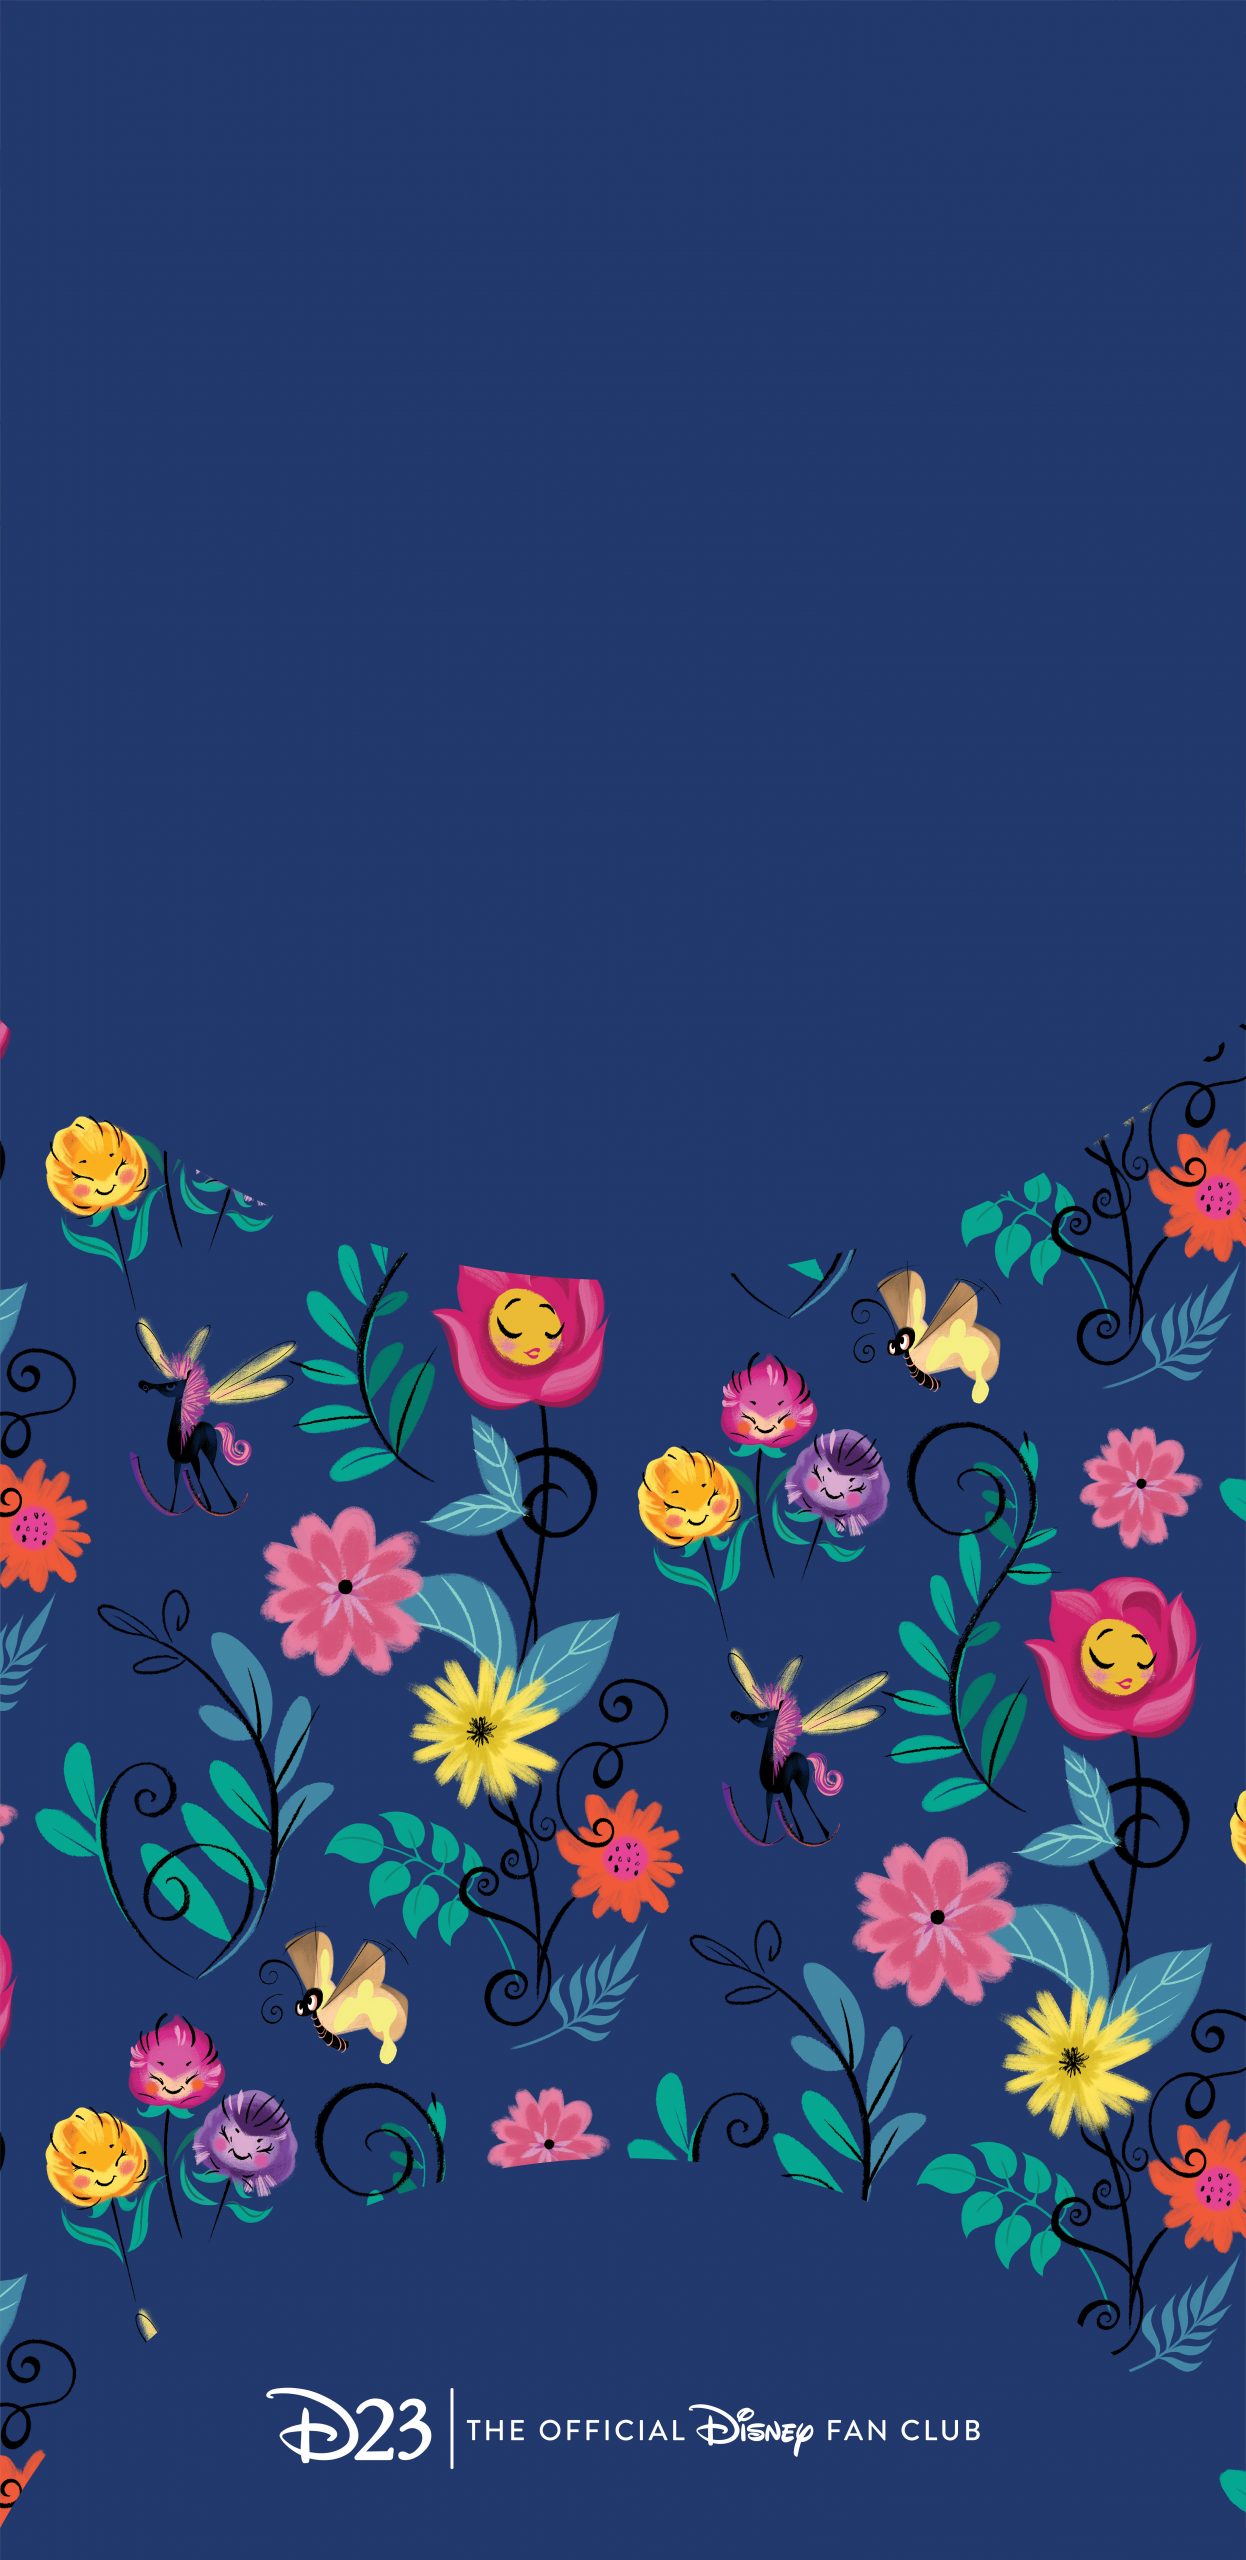 Upgrade Your Phone With These Gorgeous 'Alice in Wonderland' Disney Wallpaper!. the disney food blog